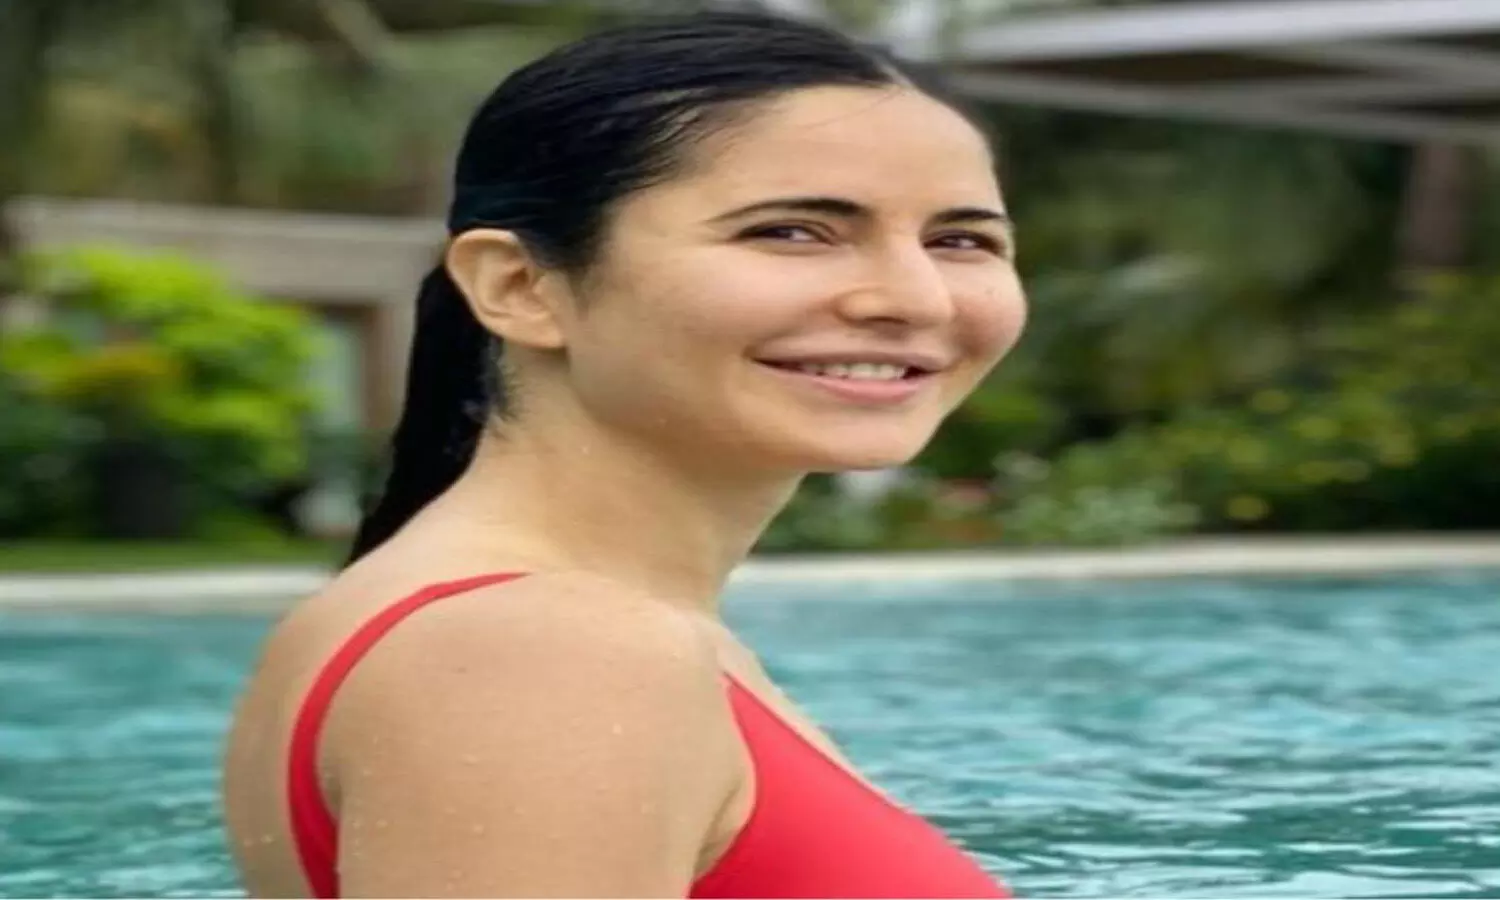 Katrina Kaif shares no makeup PIC while chilling in pool; fans say Gorgeous Diva